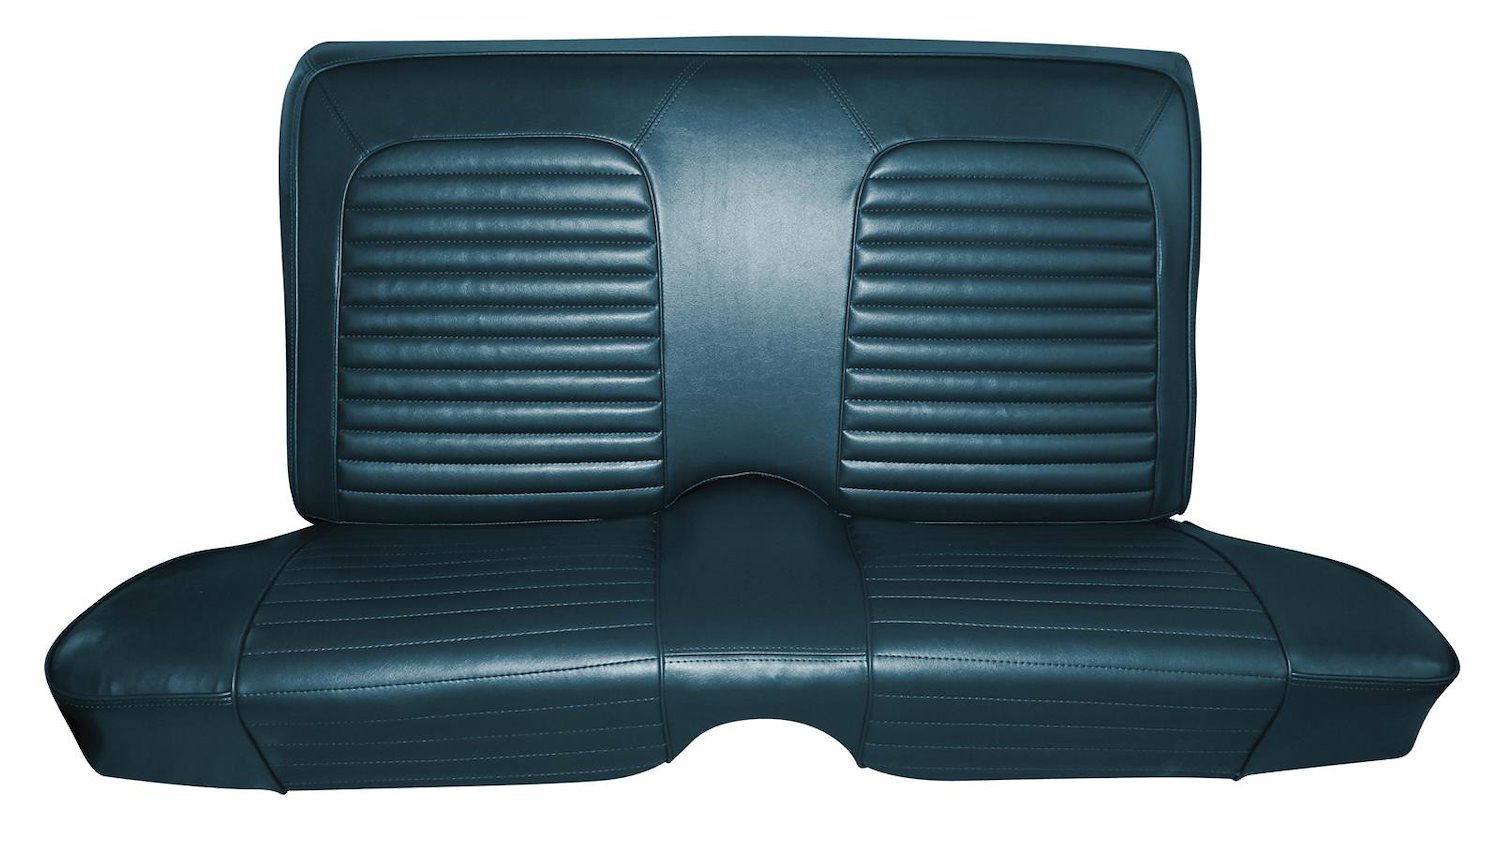 70 MUSTANG DELUXE/GRANDE CONVERTIBLE REAR BENCH SEAT BLUE T=L-3788 & UI=L-4069